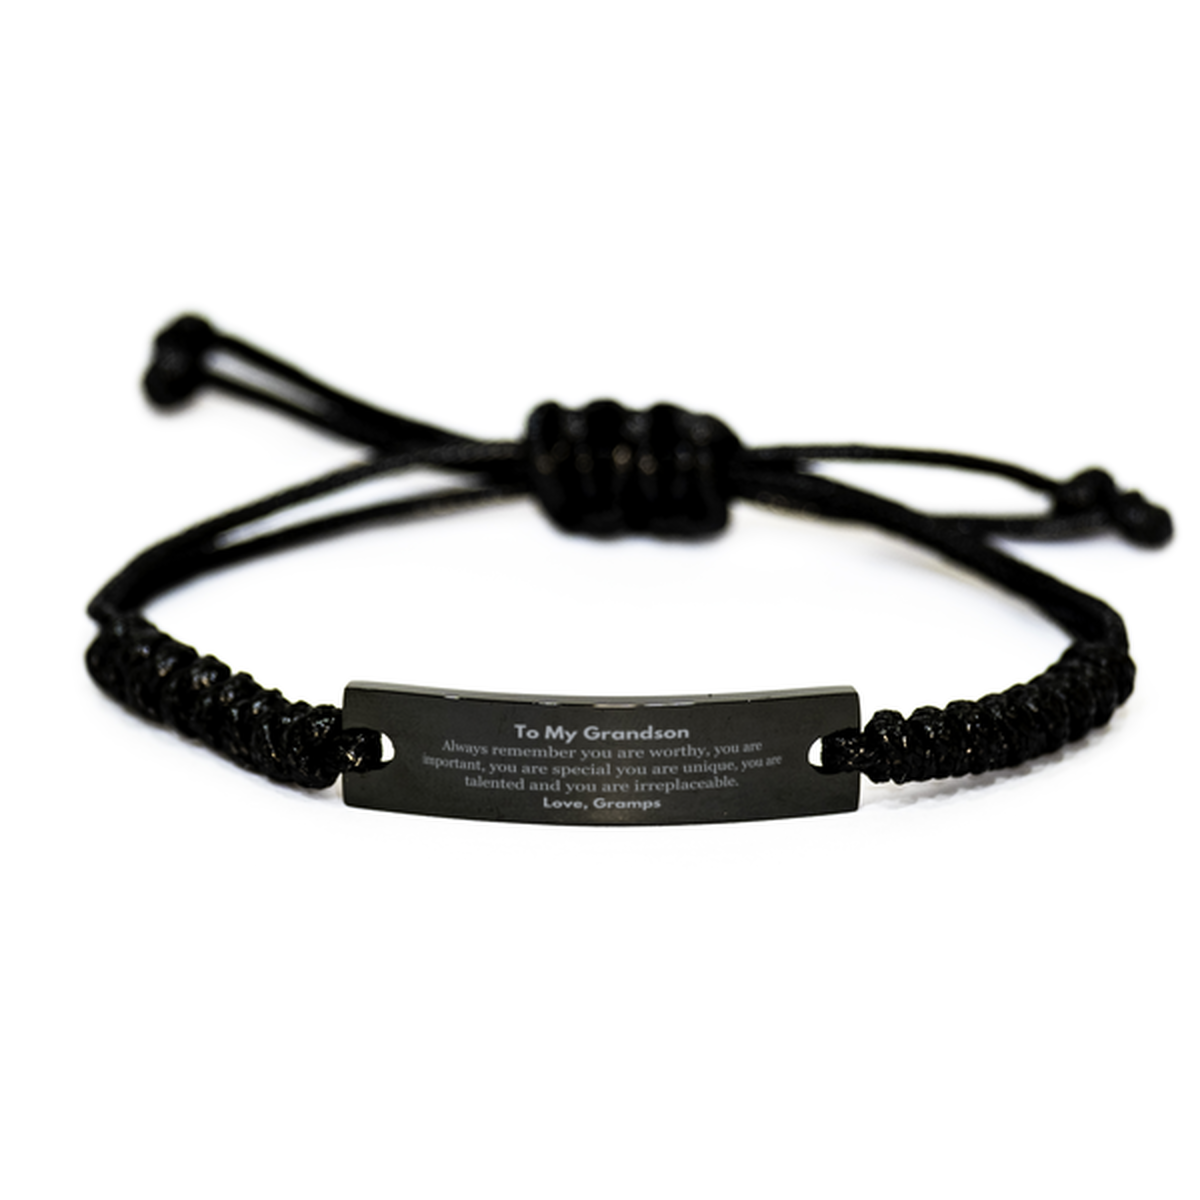 Grandson Birthday Gifts from Gramps, Inspirational Black Rope Bracelet for Grandson Christmas Graduation Gifts for Grandson Always remember you are worthy, you are important. Love, Gramps